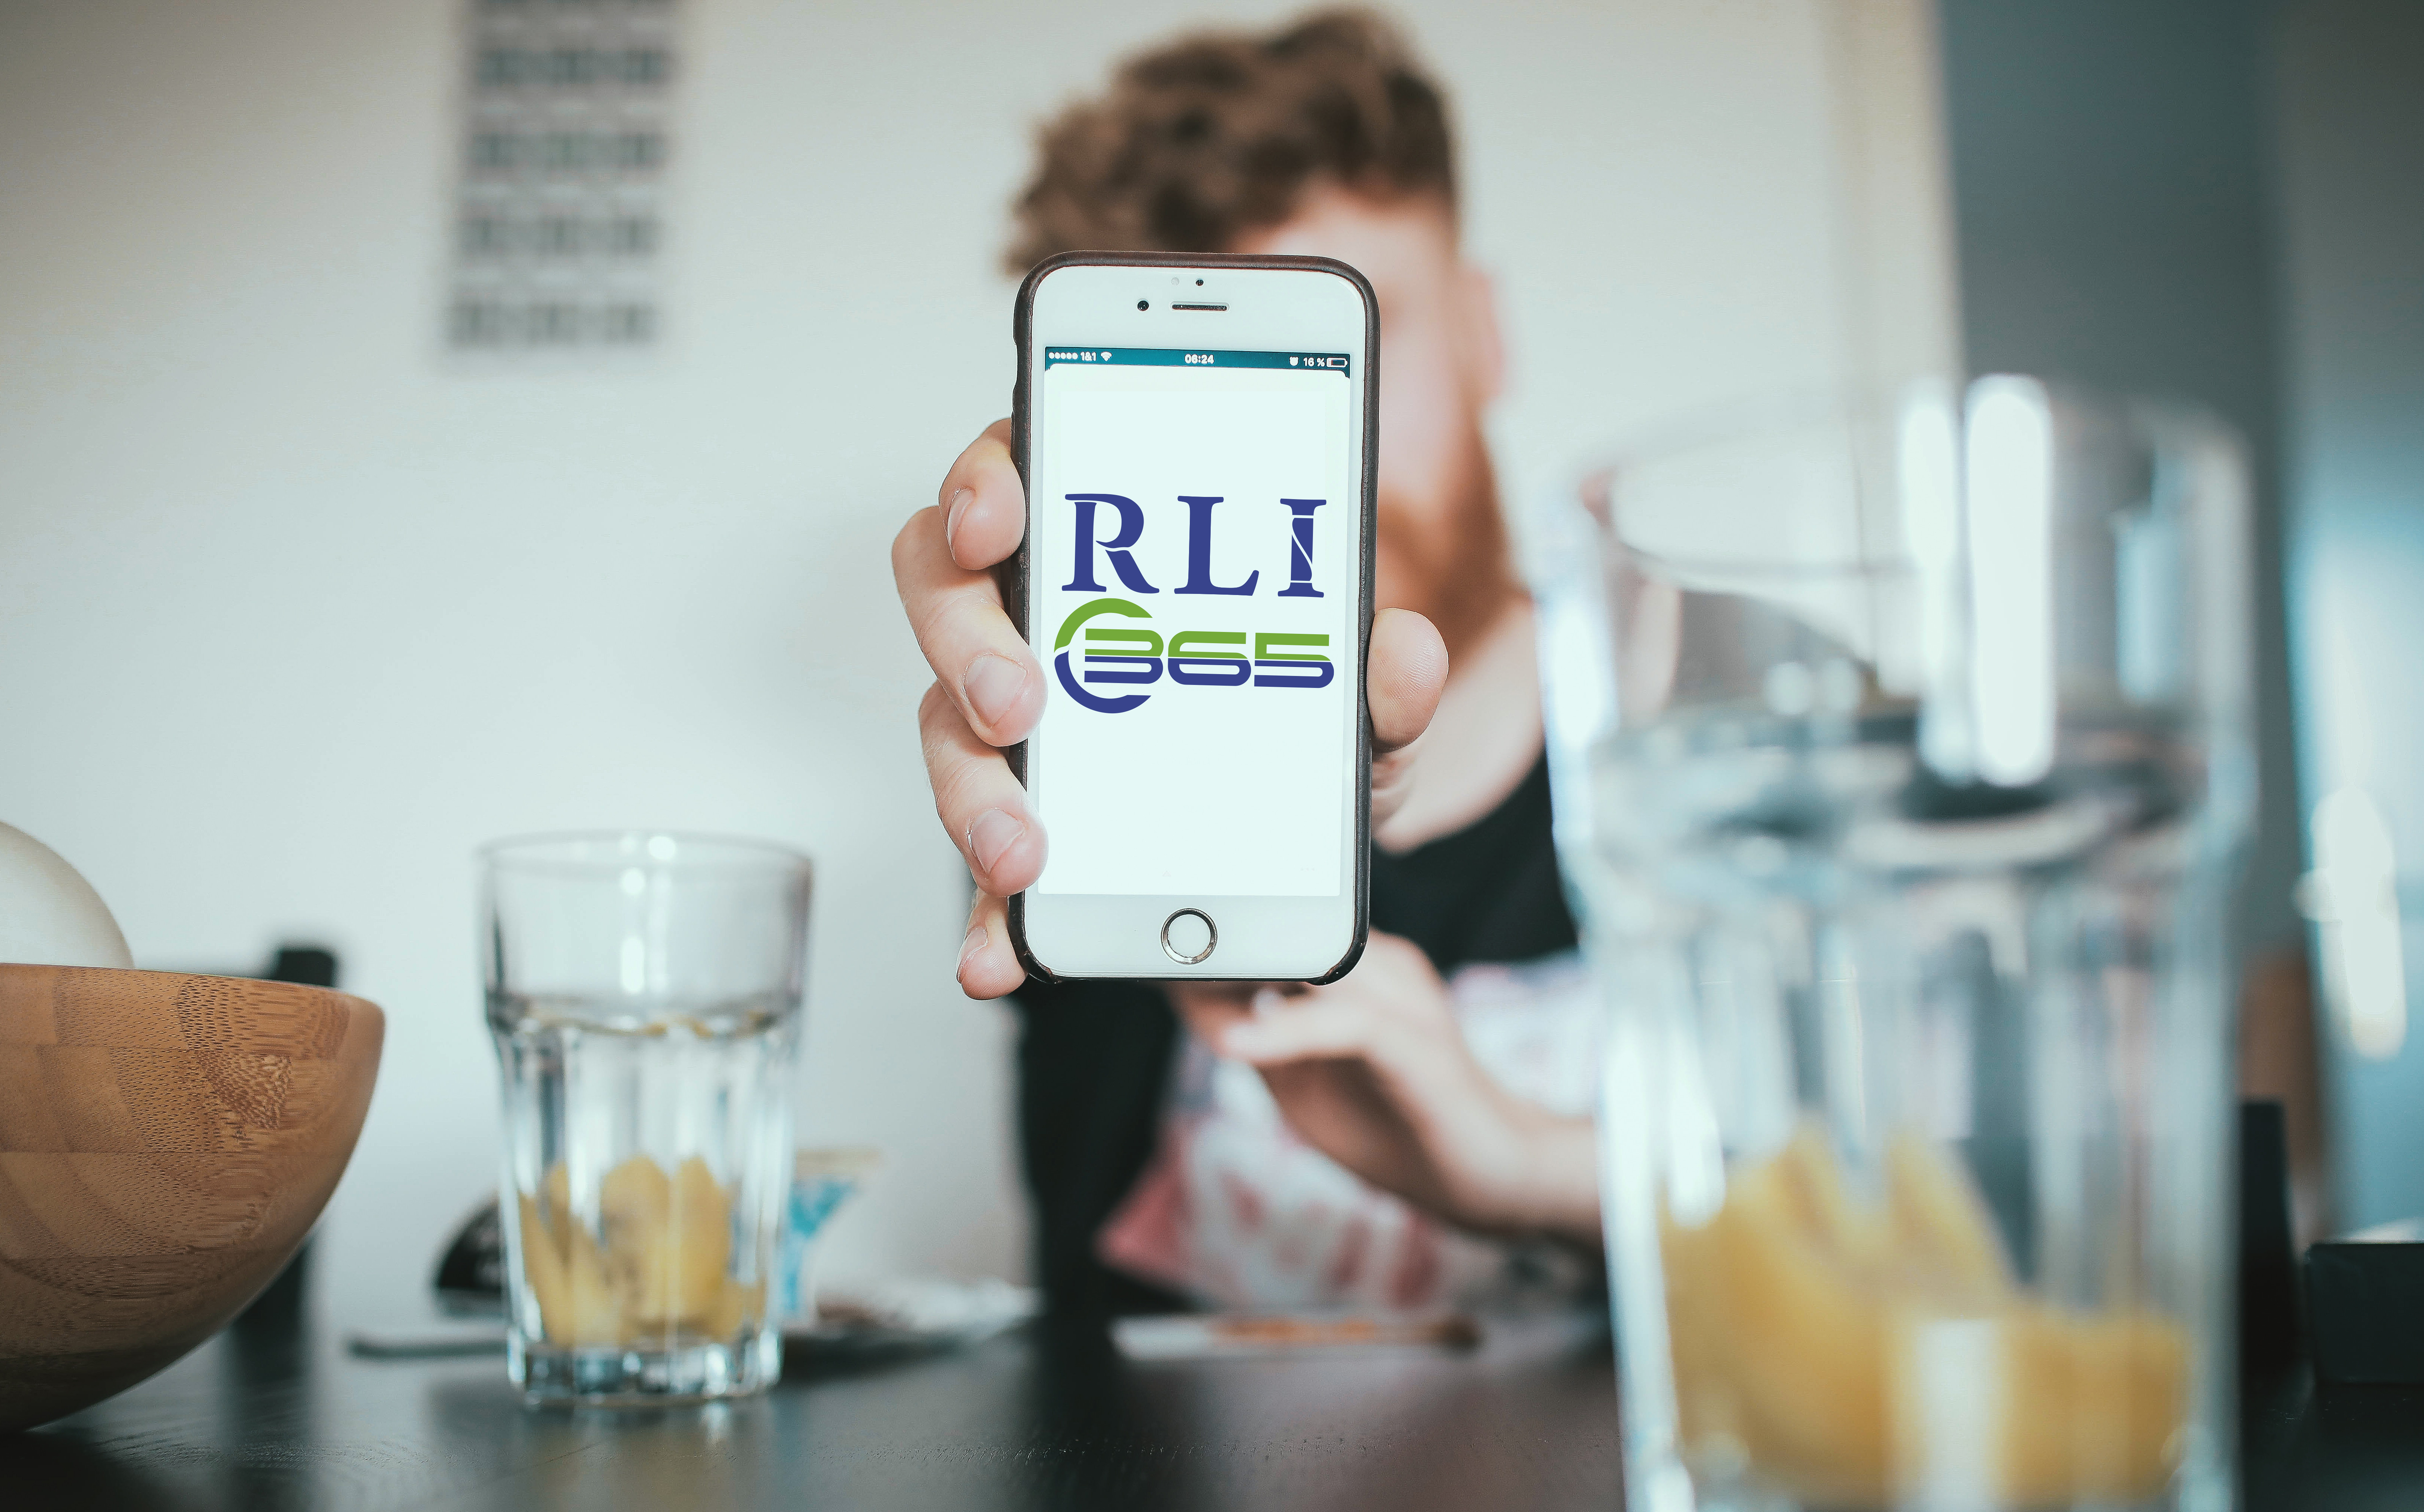 A picture of someone using RLI365